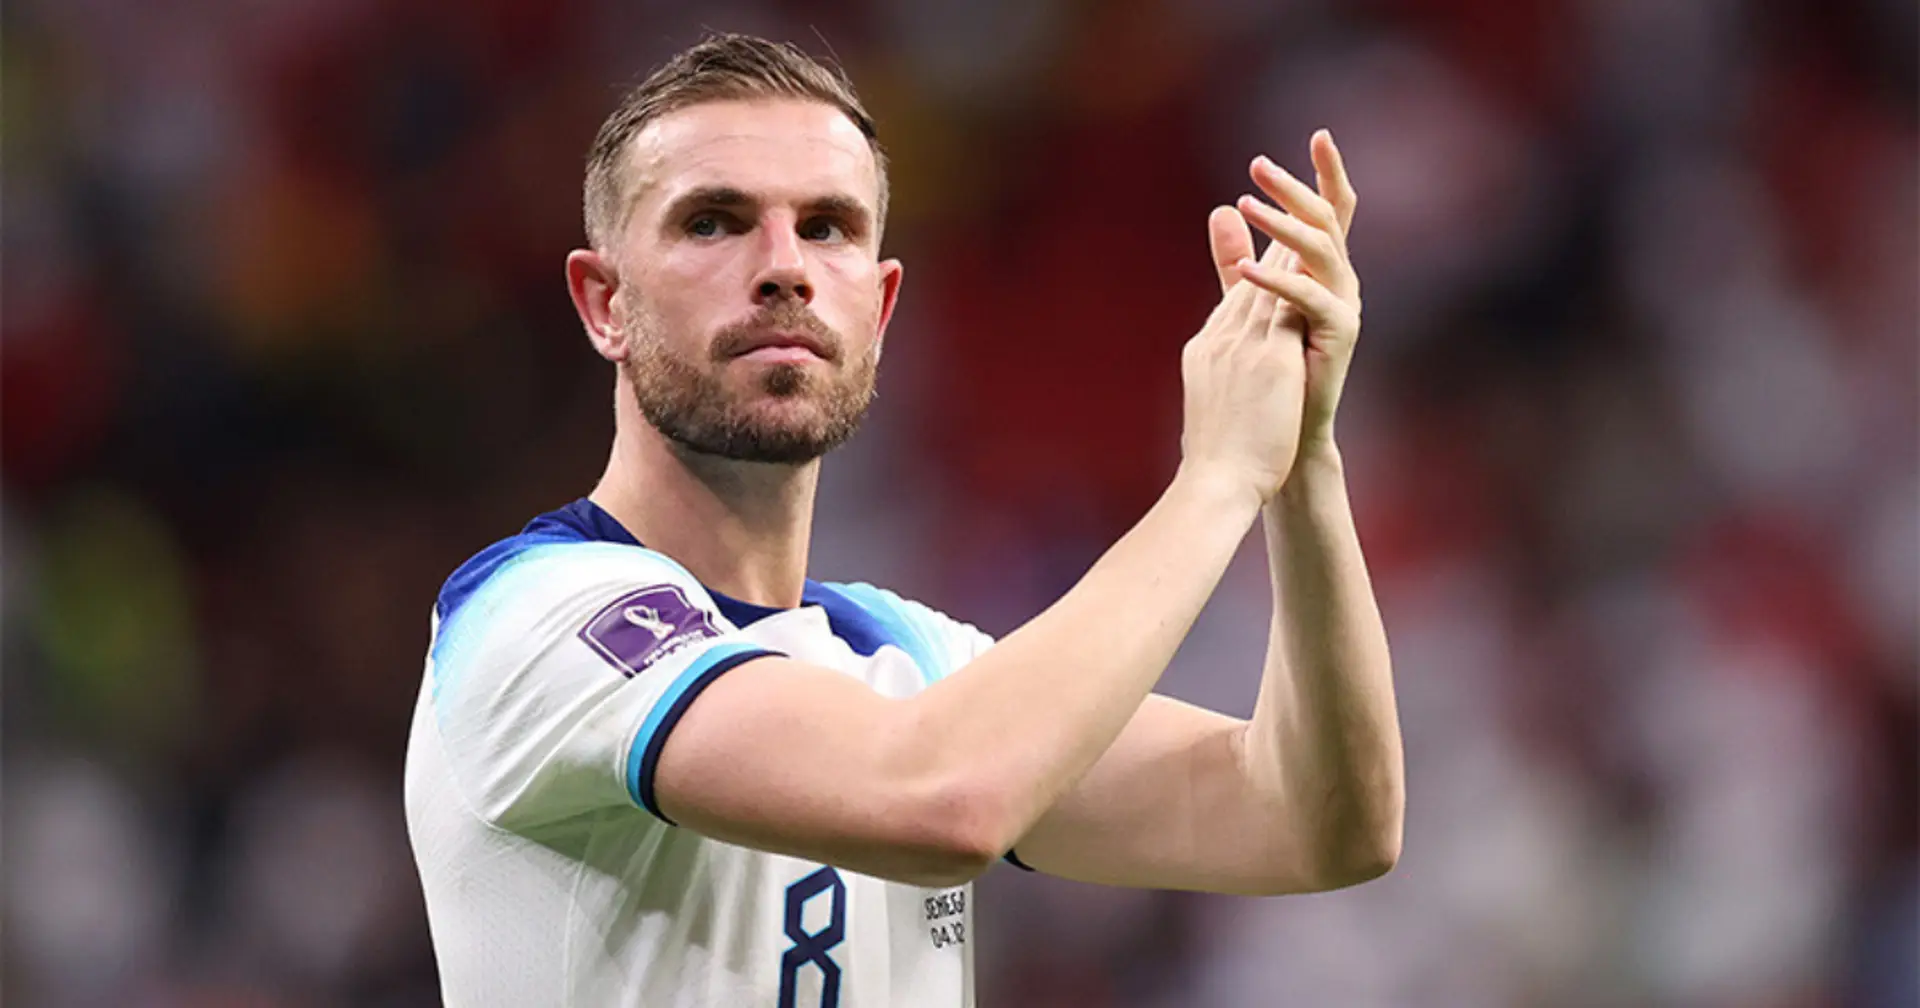 Henderson left out of England XI due to fitness issues and 2 more under-radar stories today